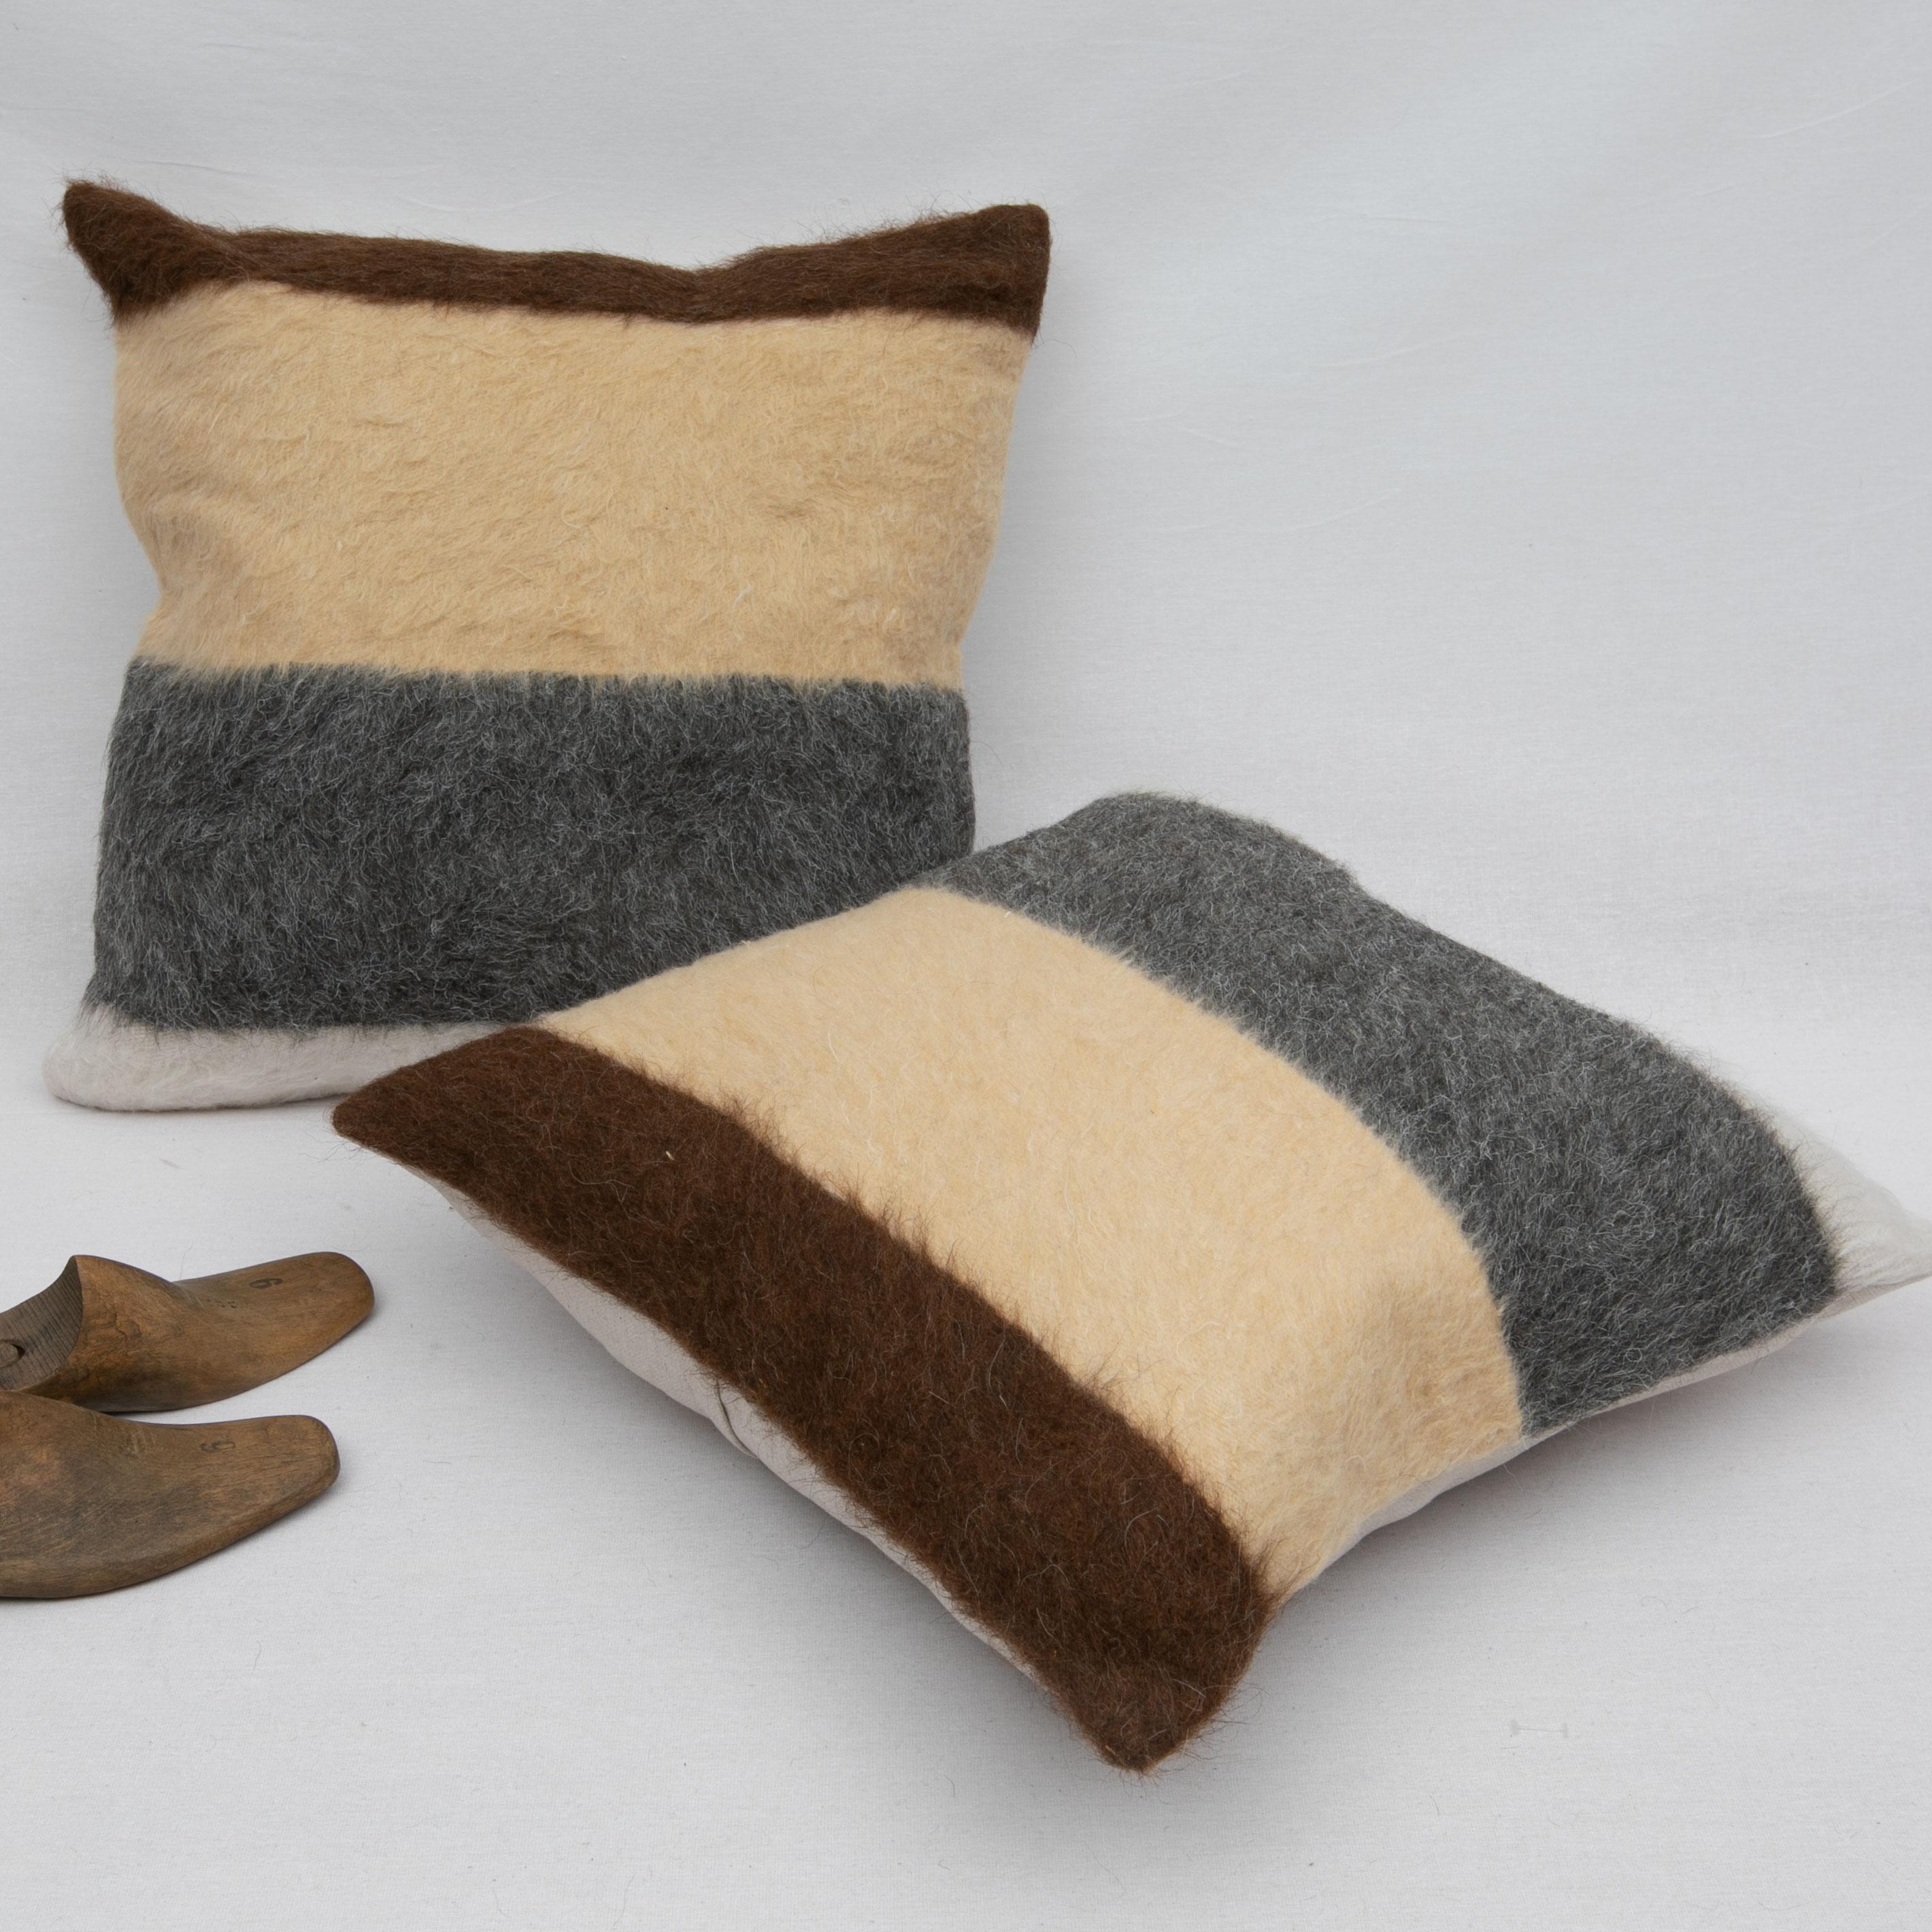 Rustic Angora/ Mohair Siirt Blanket Pillow Covers, 1960s/70s